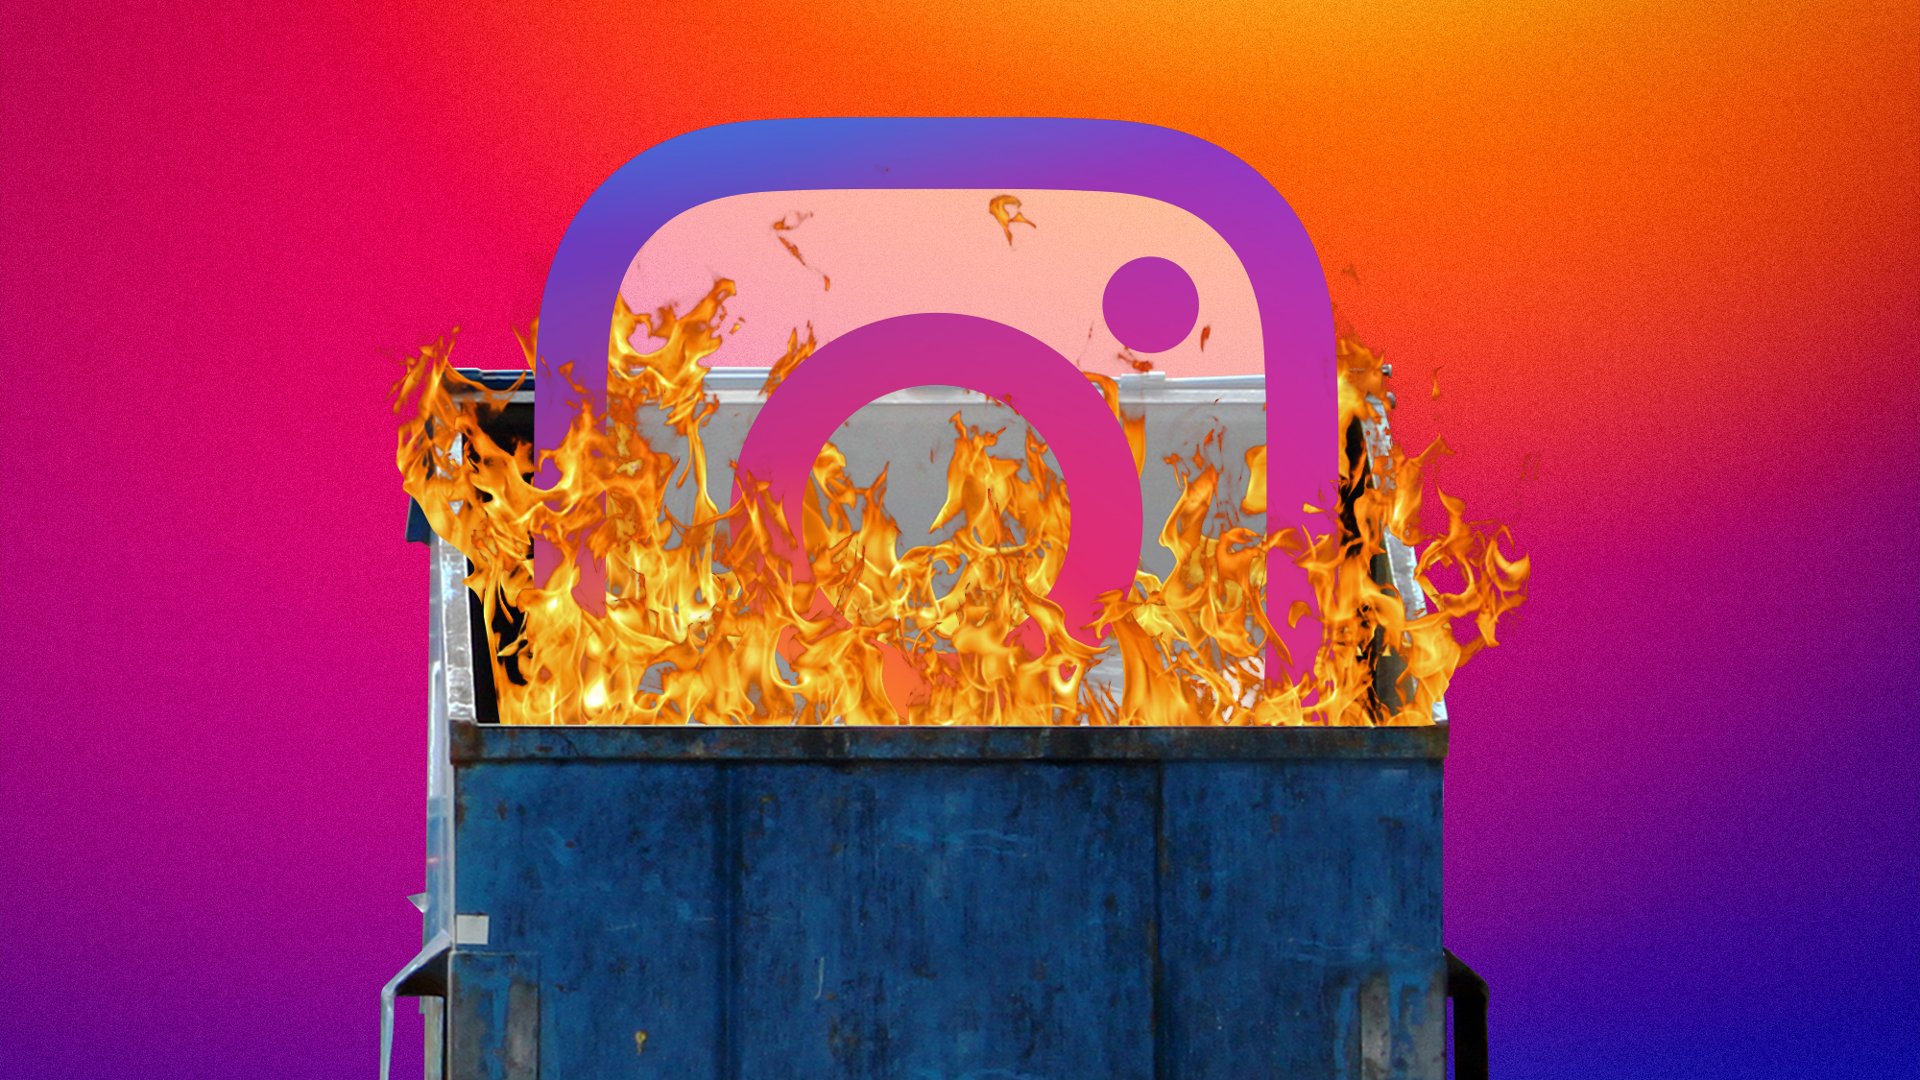 instagram prasongtakham barry blackburn shutterstock katie martin the atlantic - why does instagram only show two names of your followers